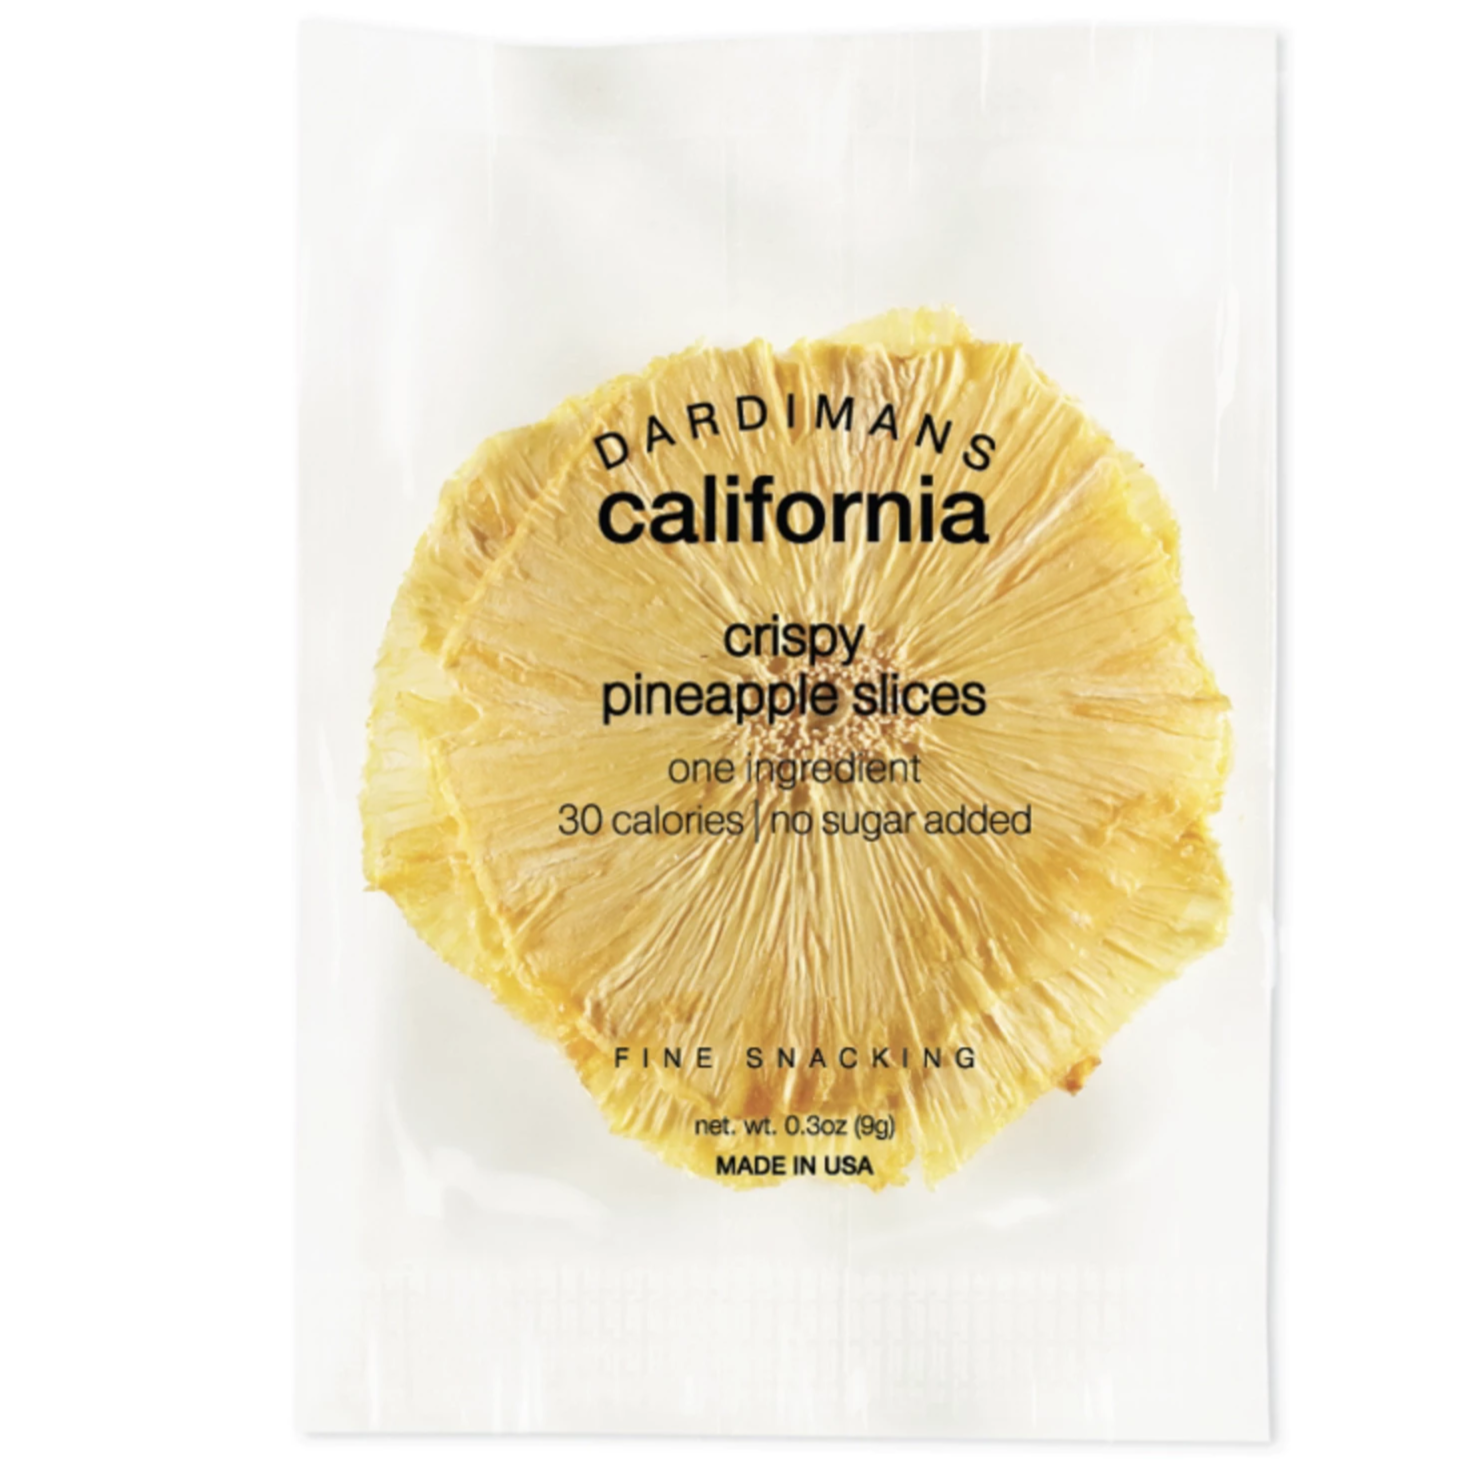 Dried pineapple slices in clear package with black writing.